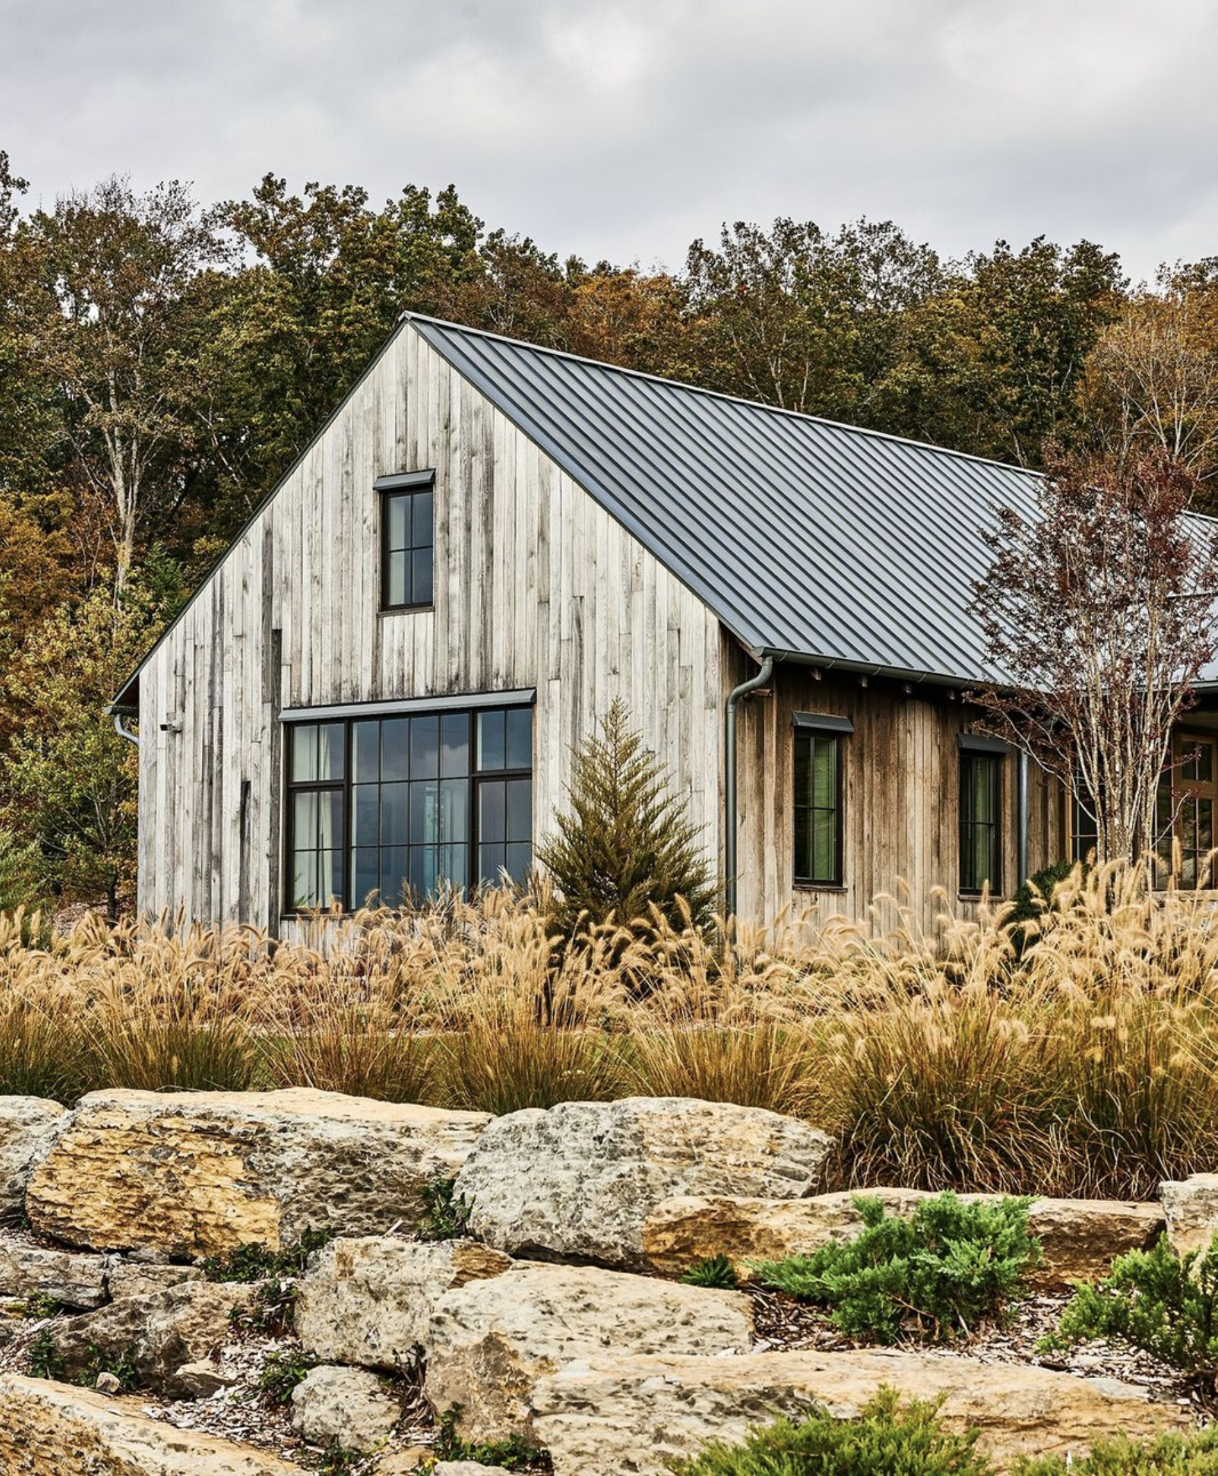 White Oak and limestone harmonize at a Knoxville home by Summerour Architects.